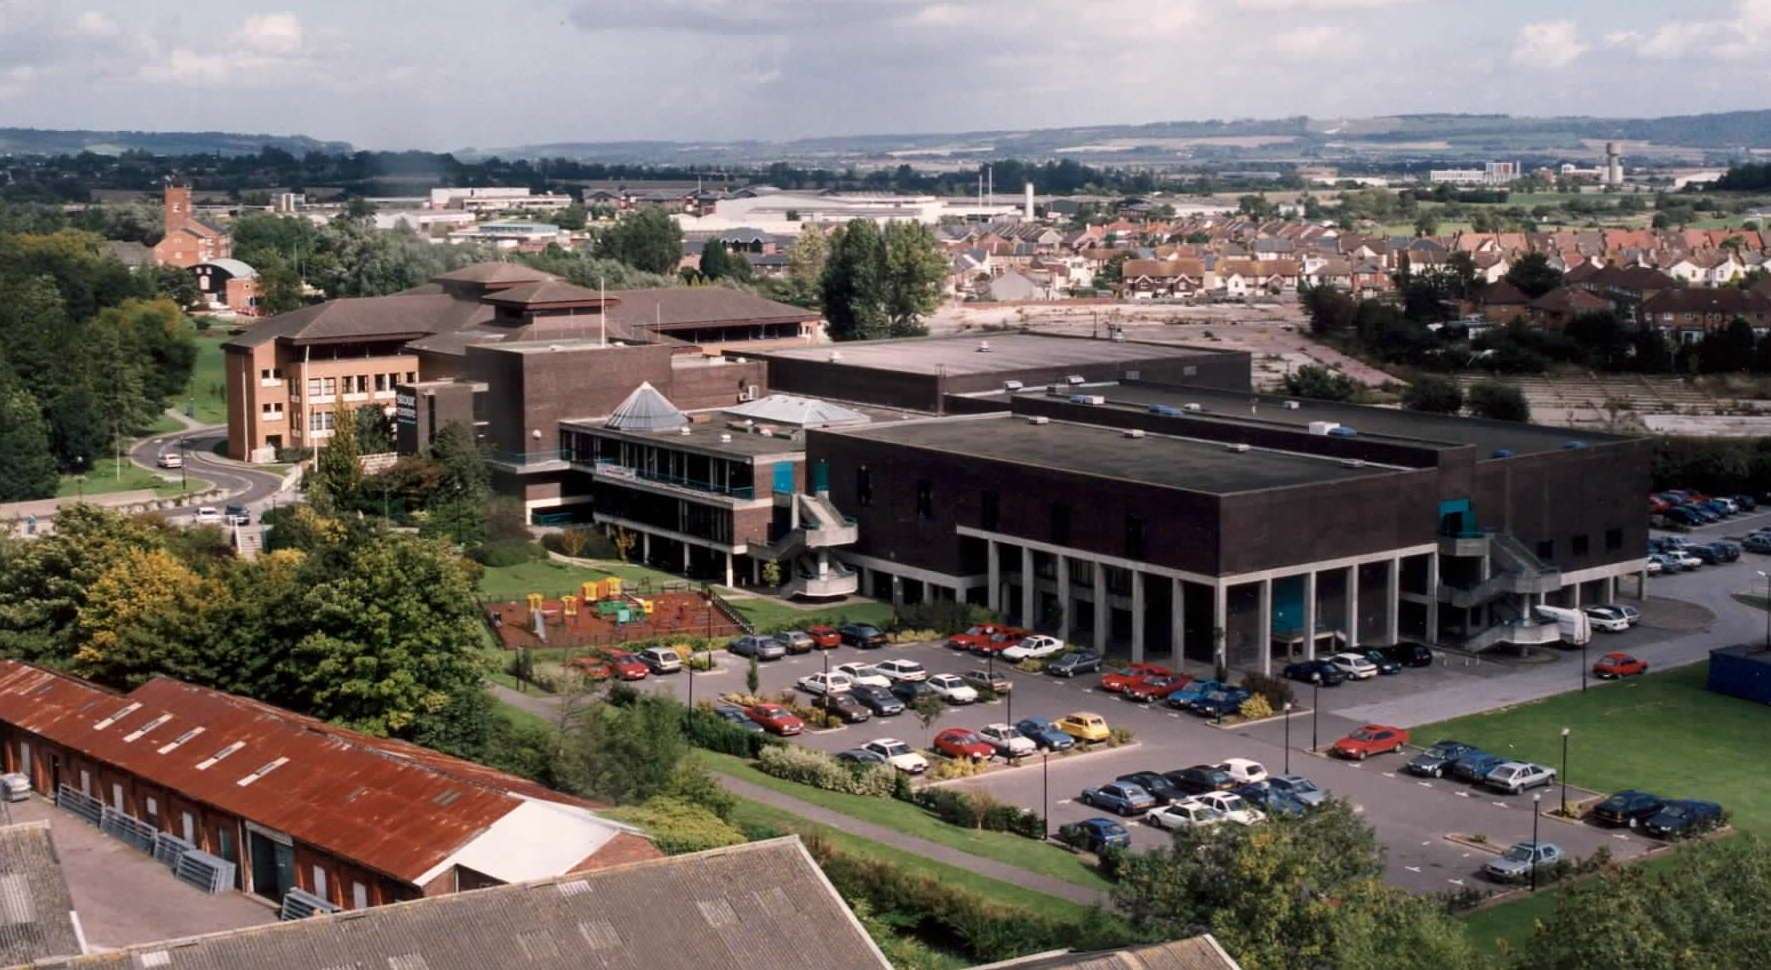 How the Stour Centre used to look before remodelling work was completed in 2007